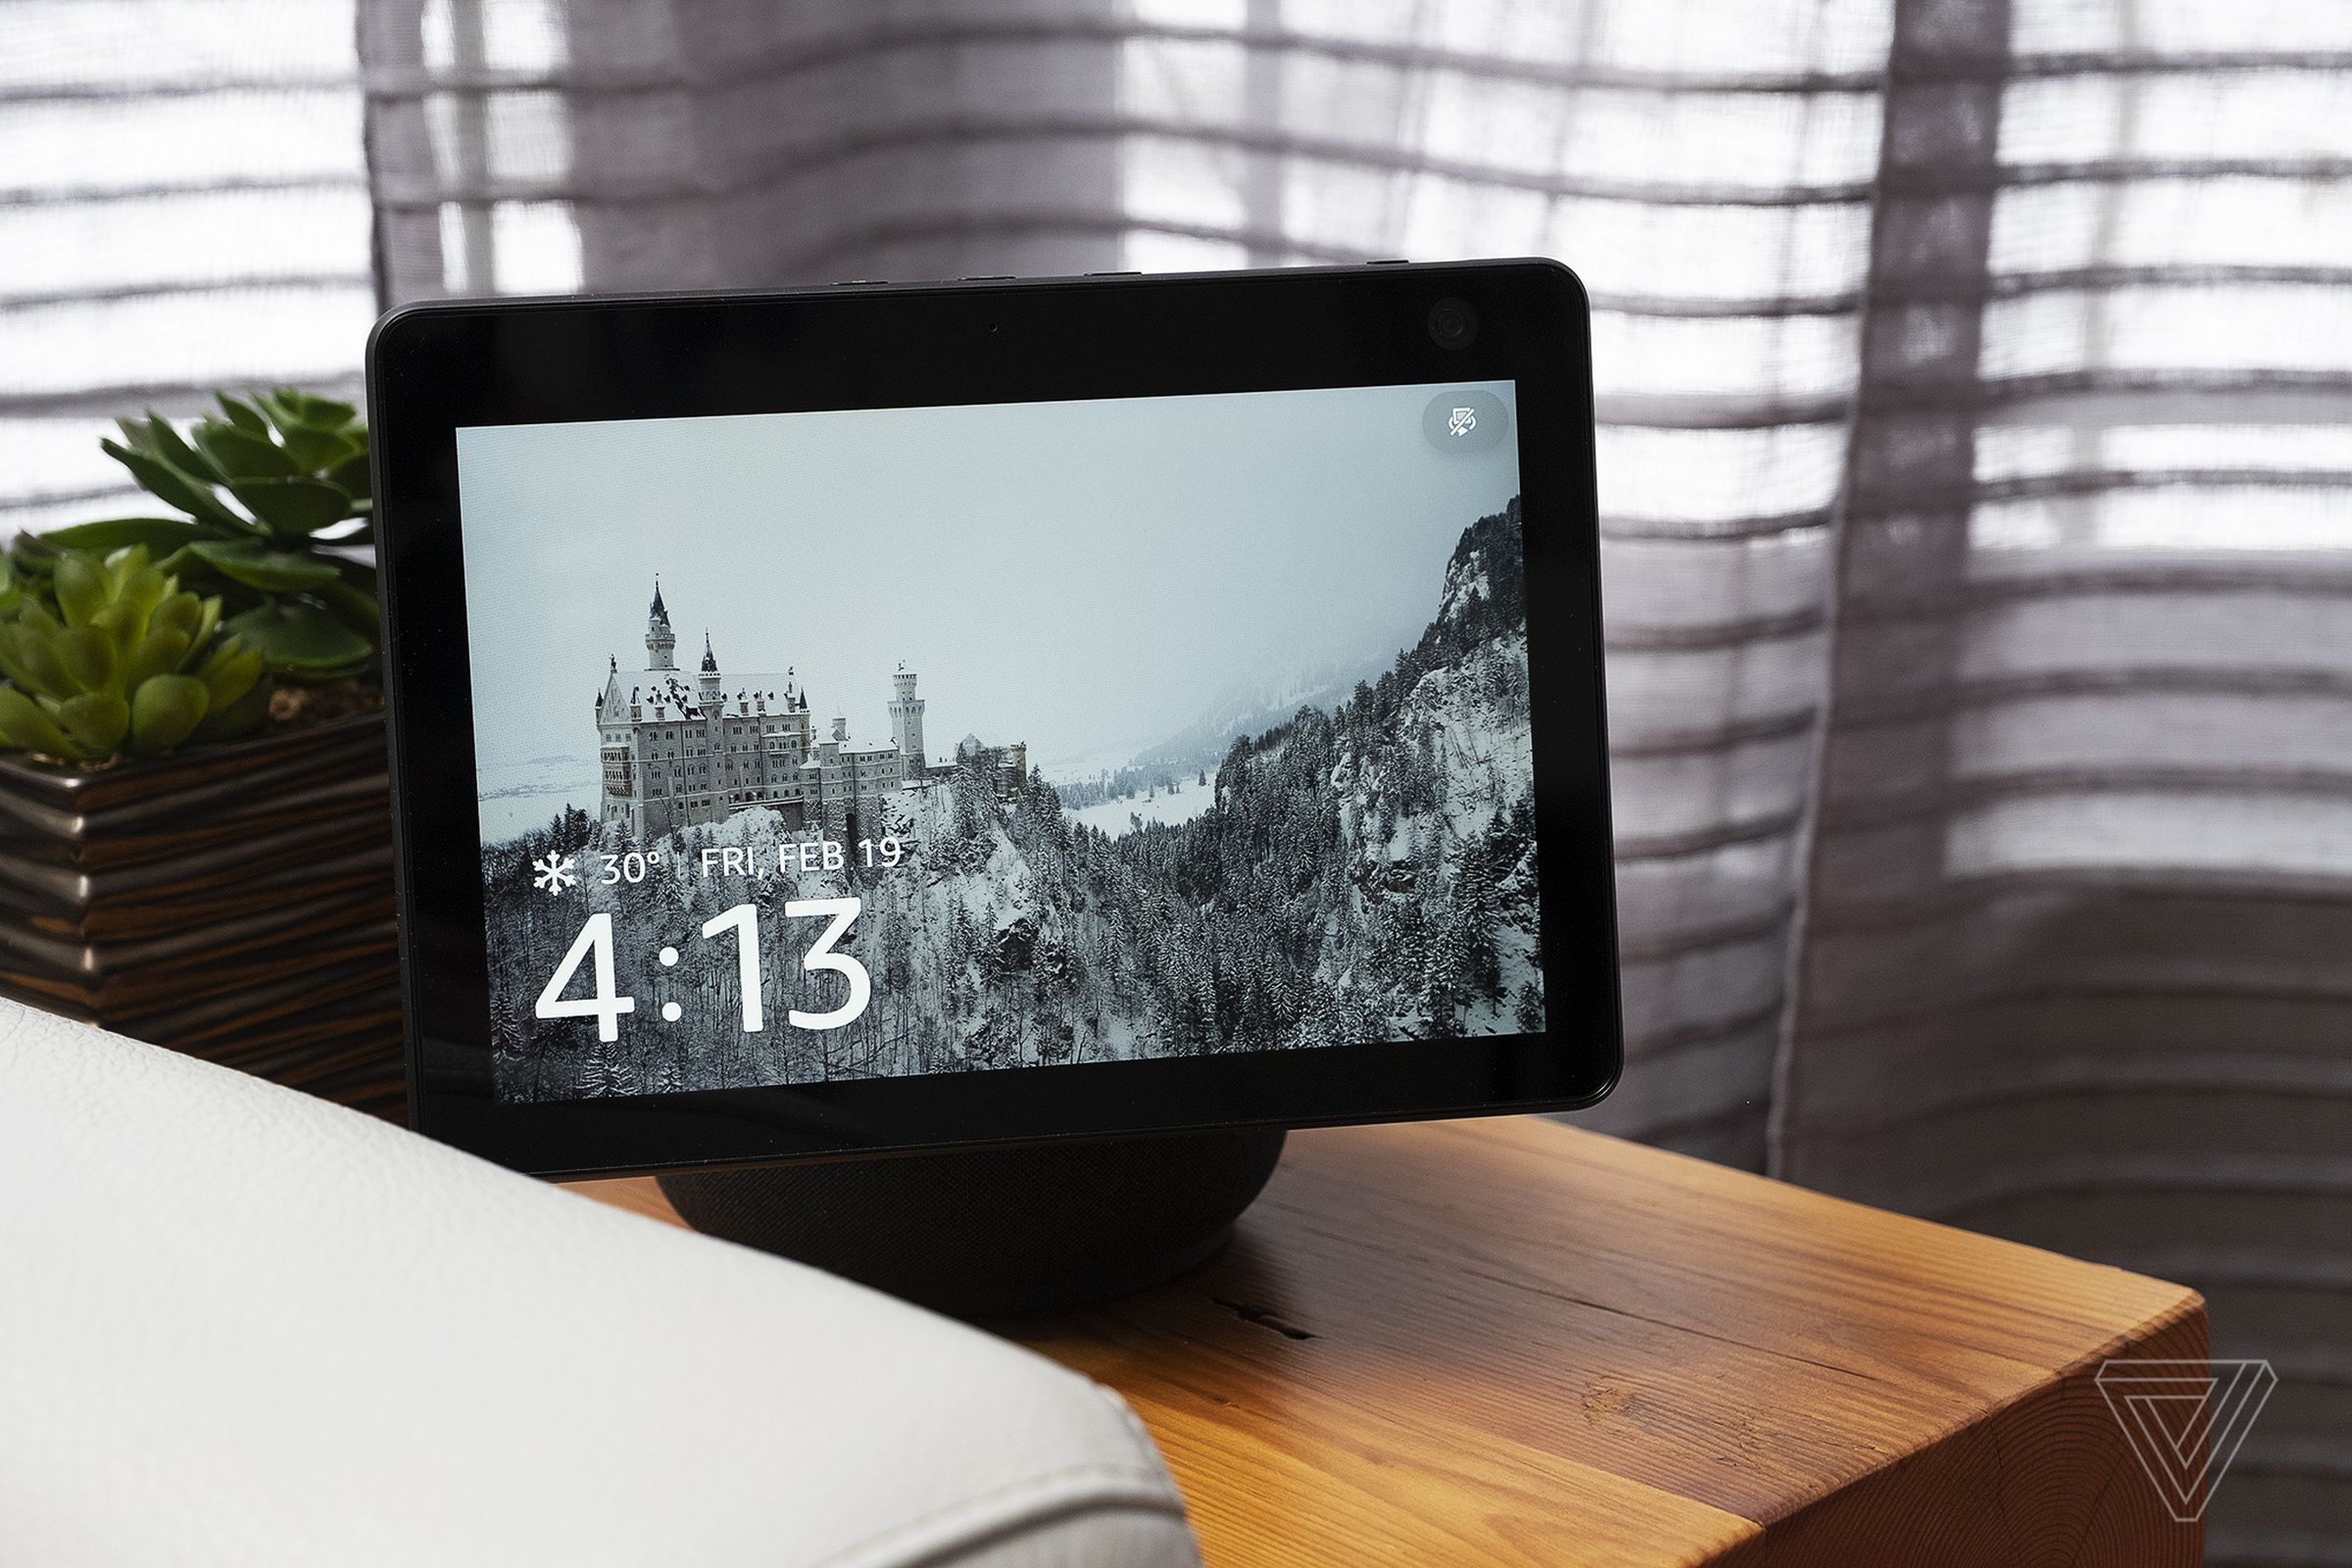 You can disable the Echo Show 10’s motion via voice or touch controls.